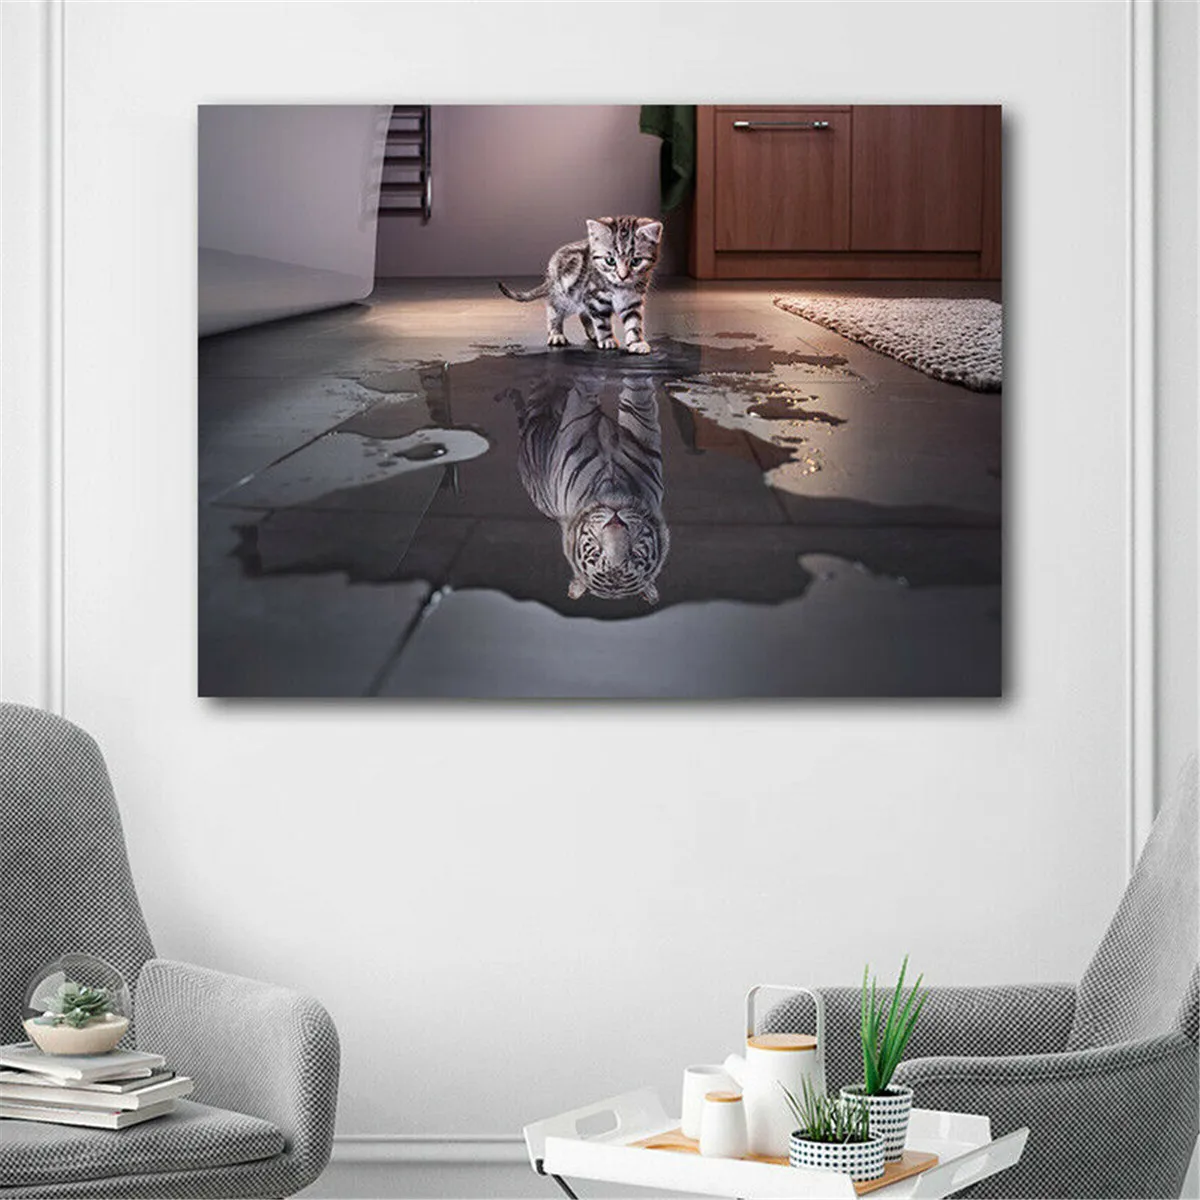 HD Canvas Printing Home Decor Wall Arts Pictures cat and tiger 50x70cm 